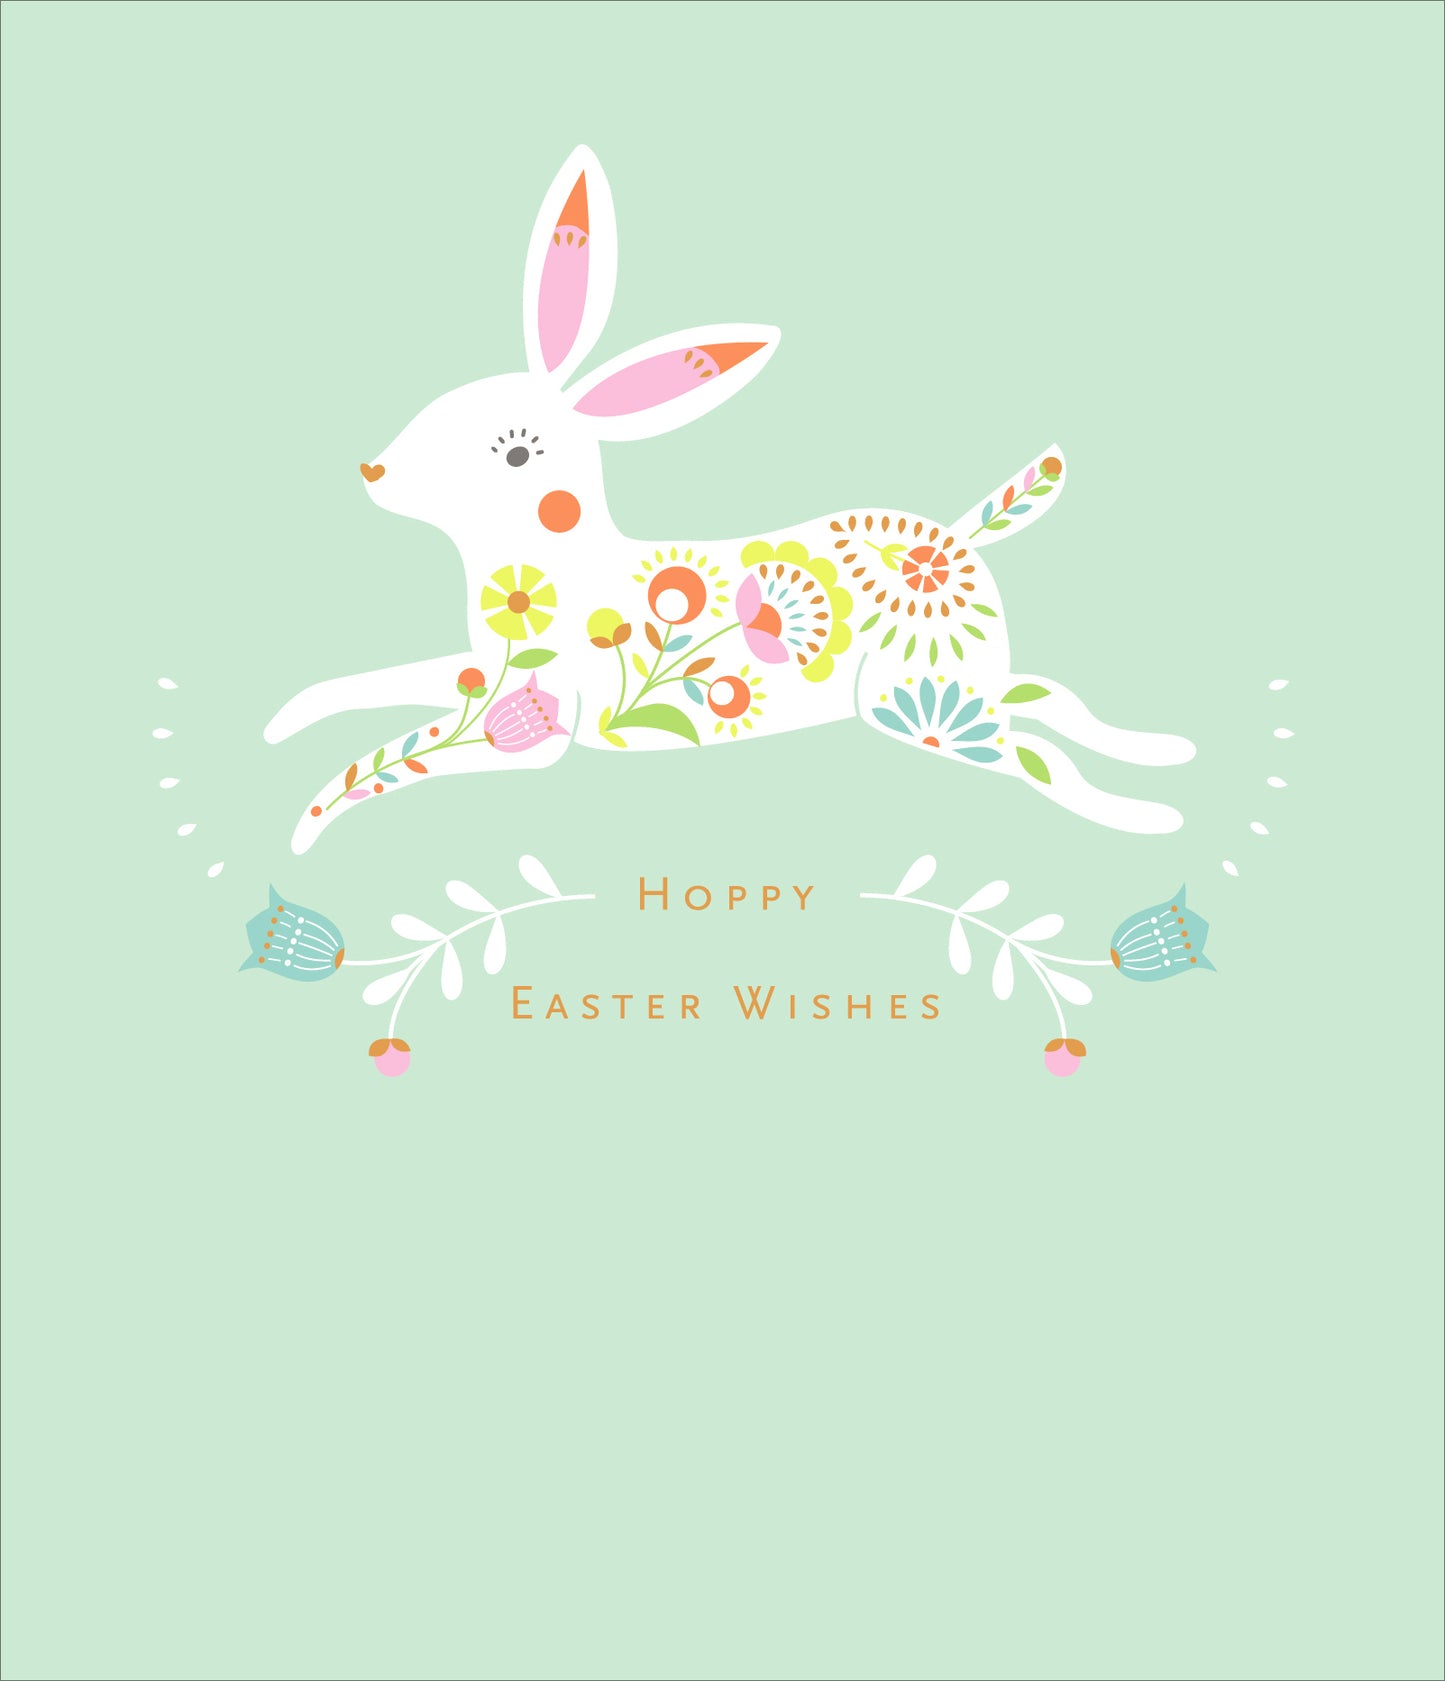 Hoppy Easter Wishes Cute Greeting Card